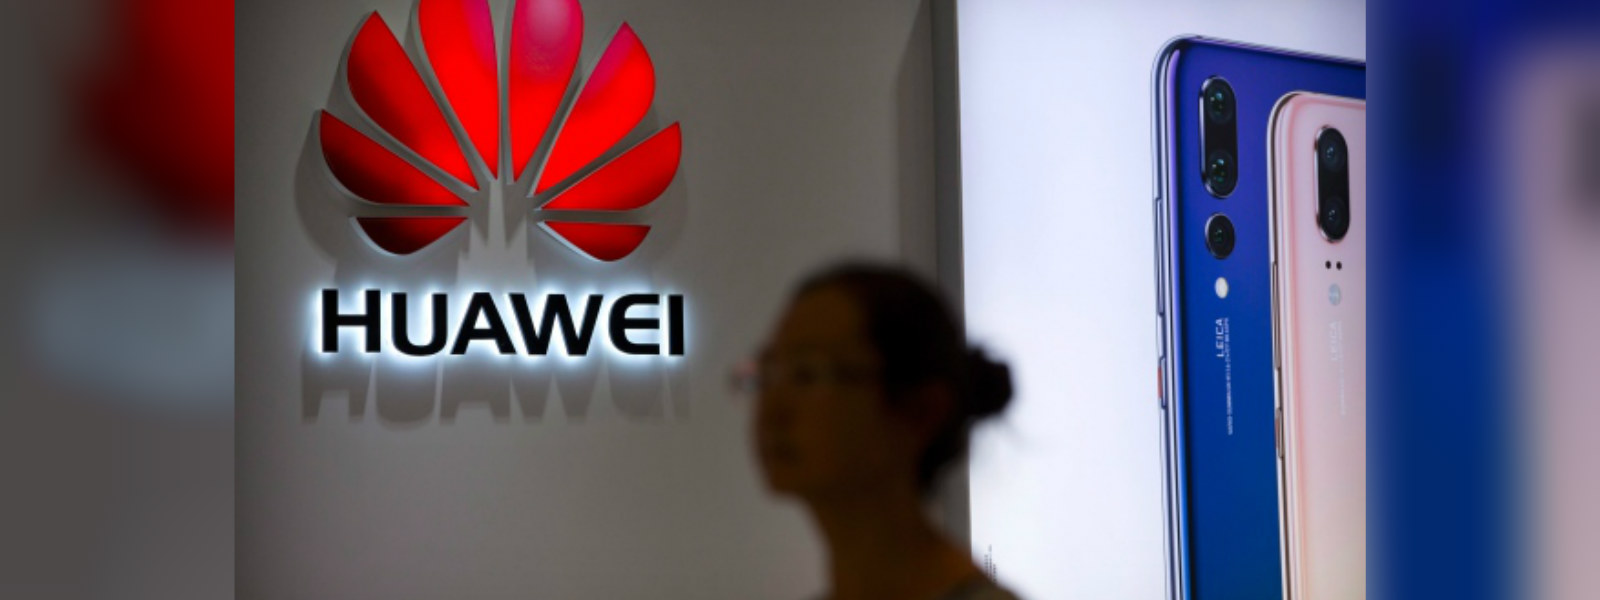 Analysts warn of Android ban hurting Huawei